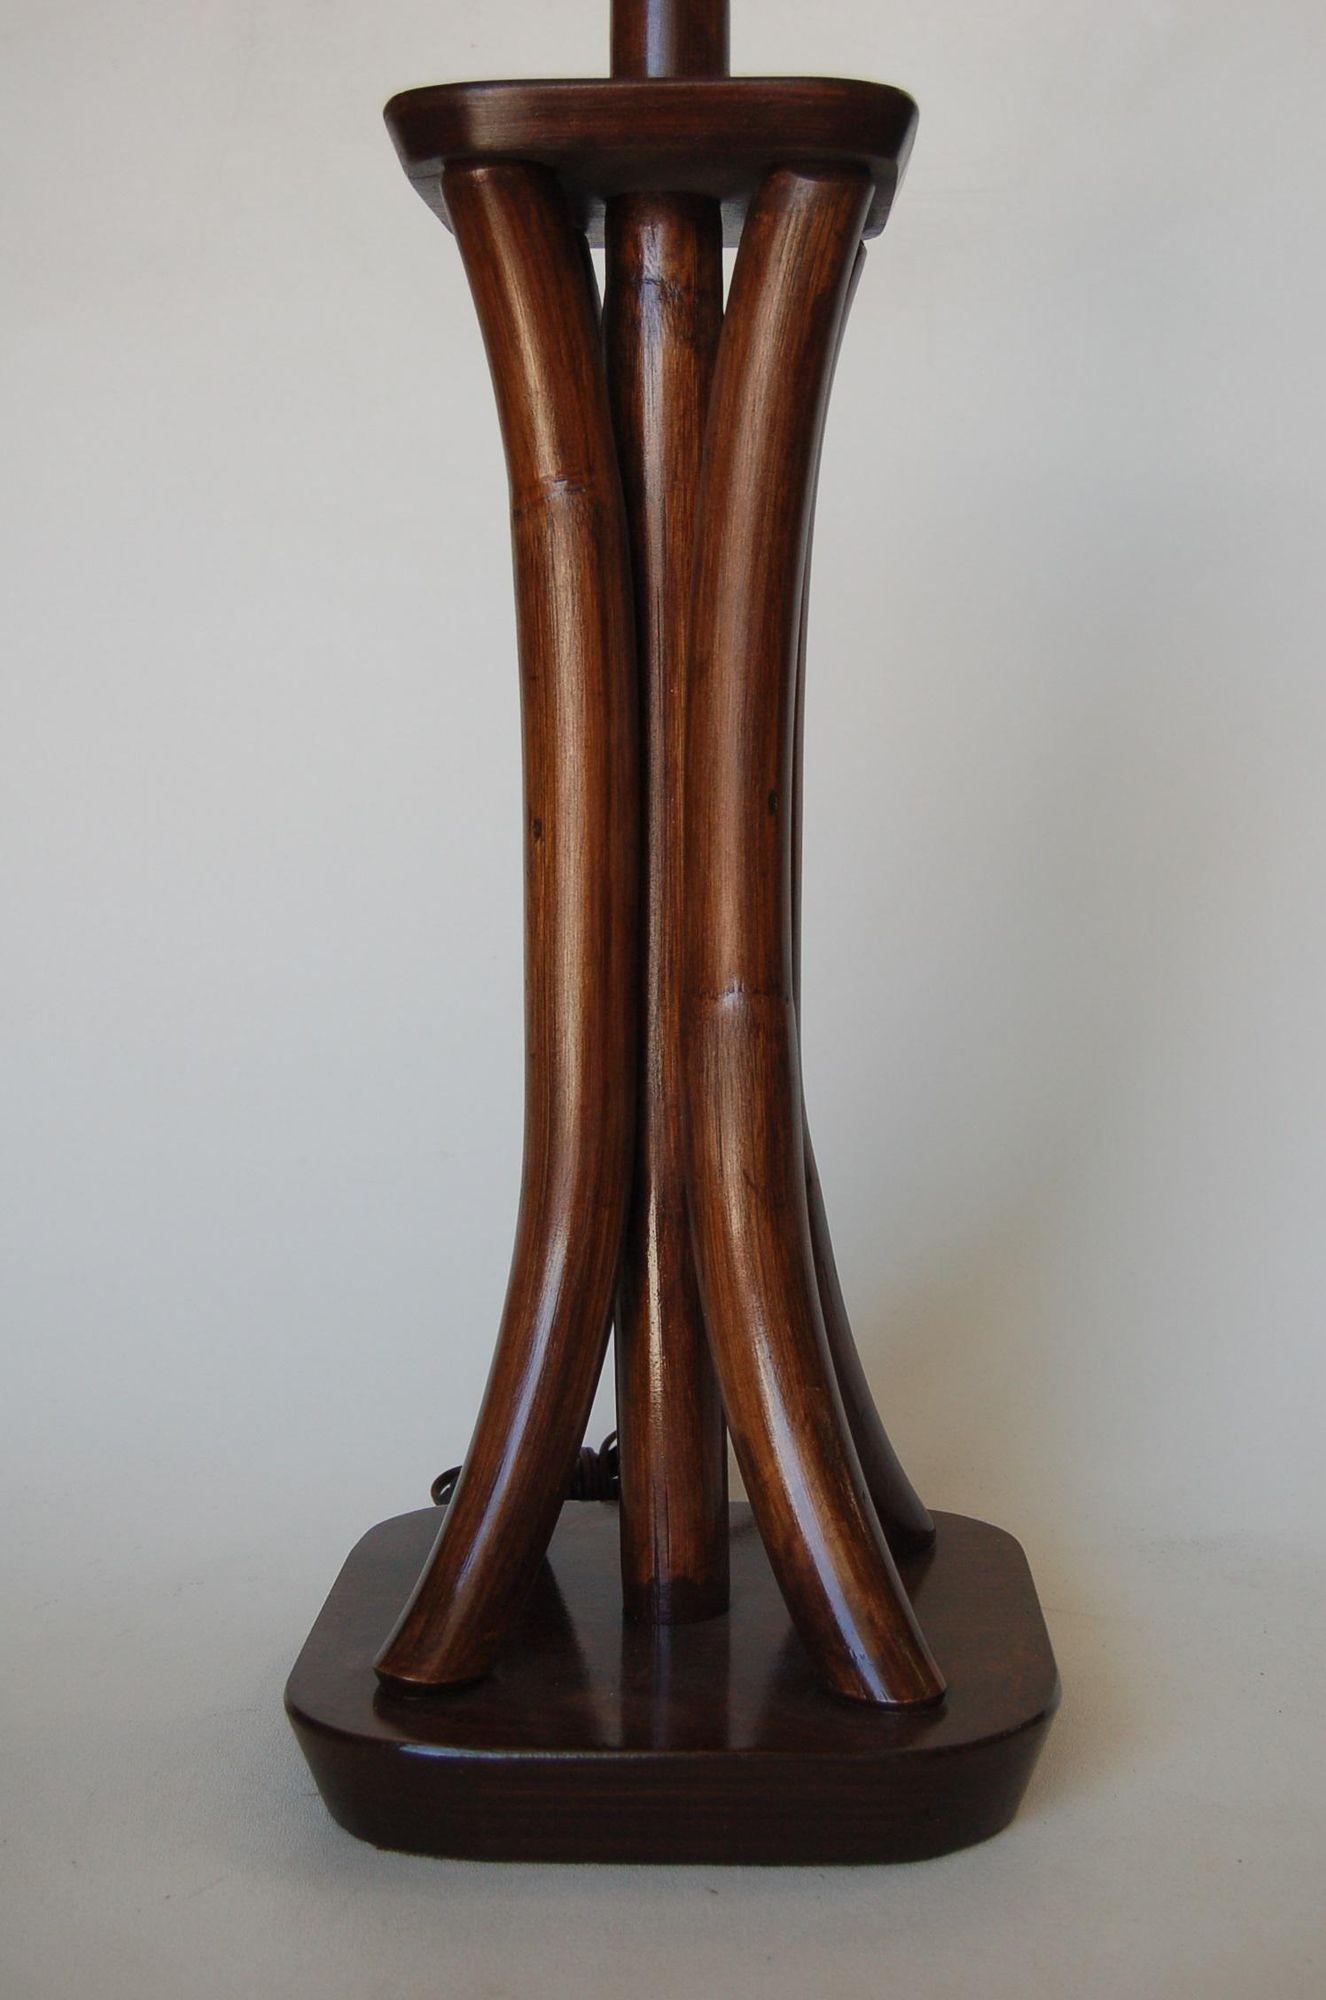 Restored Four Strand dark stained rattan bent pole table lamp with mahogany bases.

Measures 8.5 